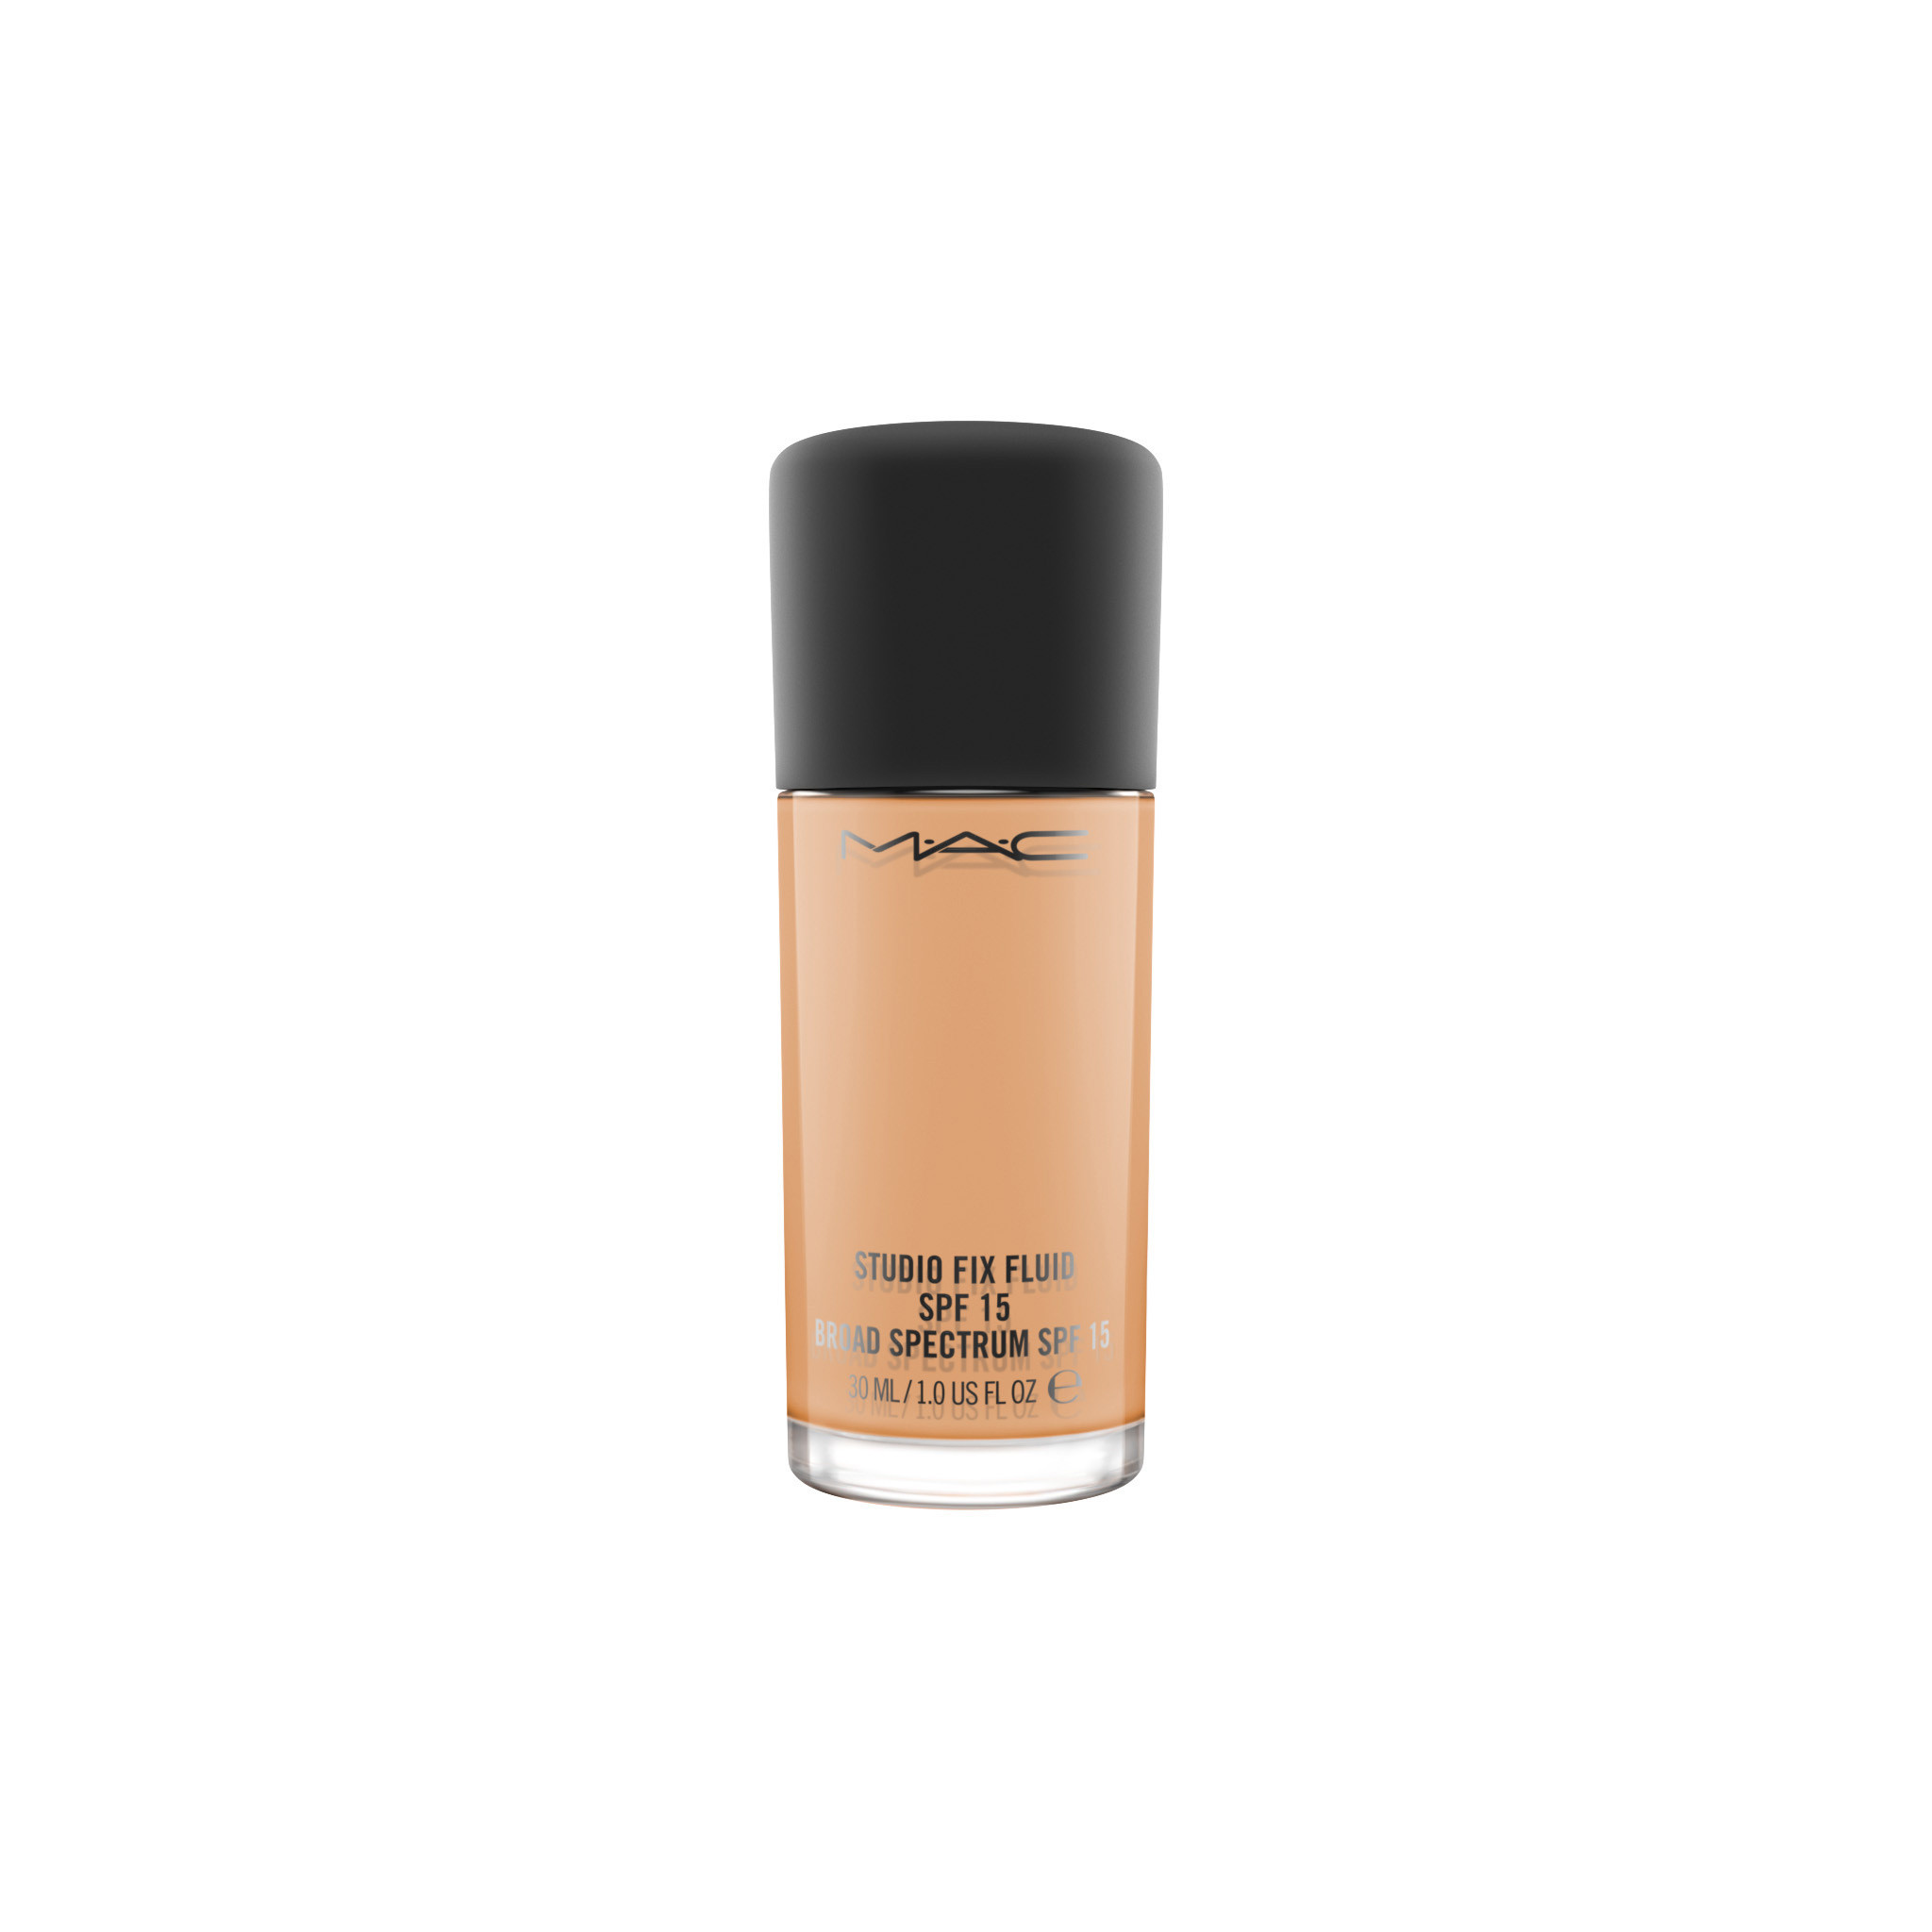 Studio Fix Fluid Foundation Spf15 - NW35, NW35, large image number 0